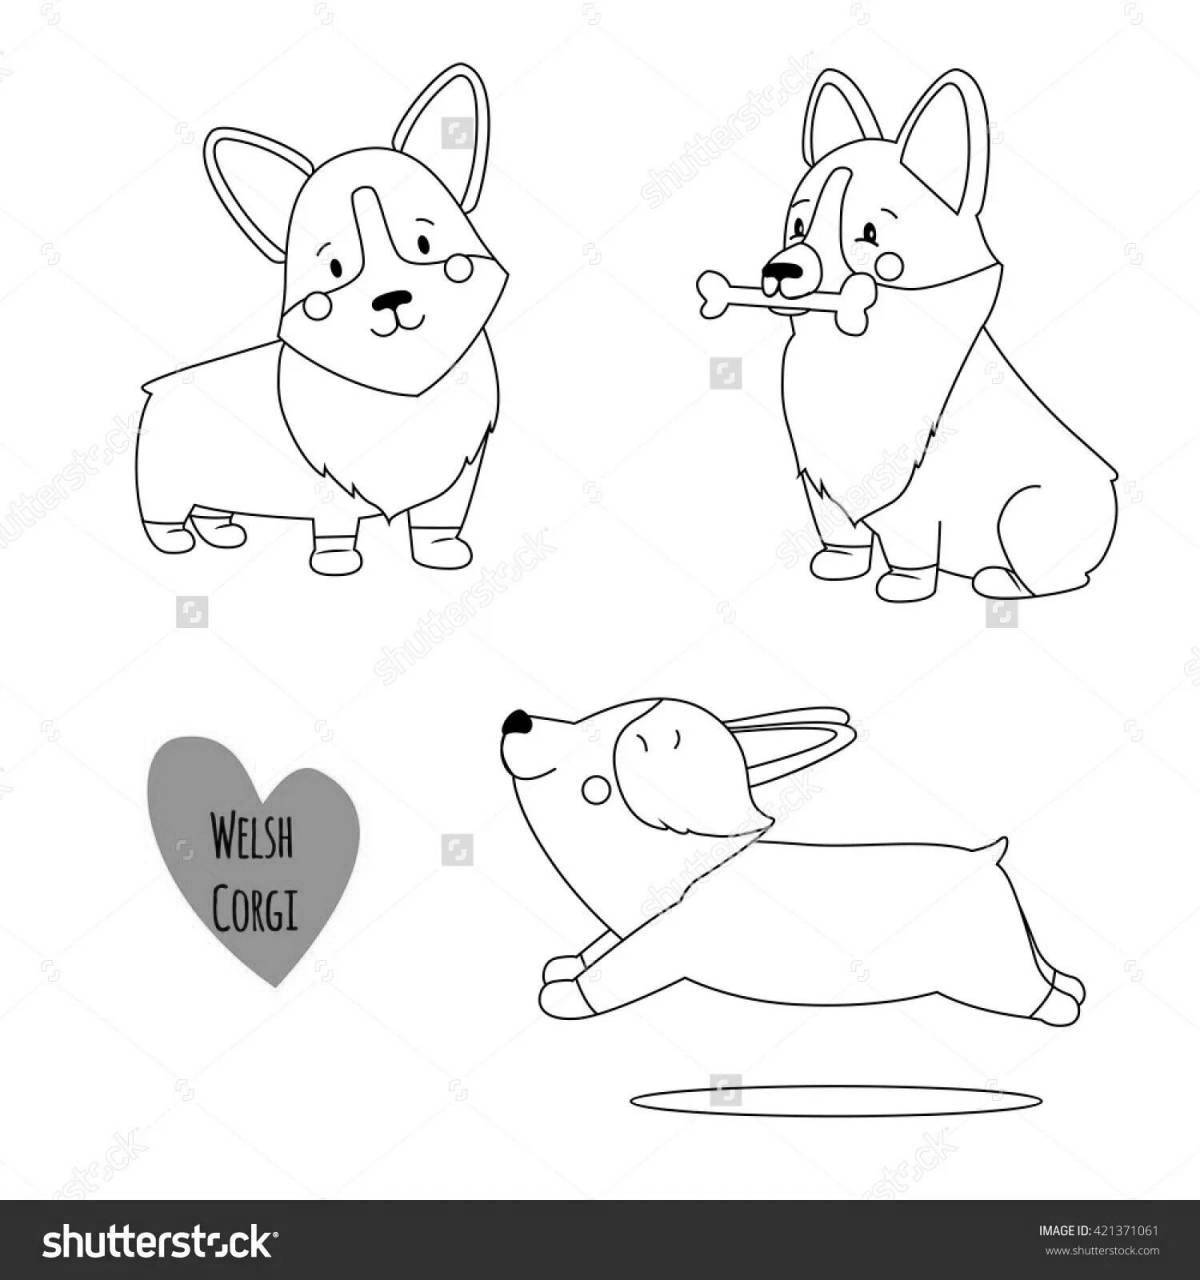 Outstanding corgi coloring page for kids